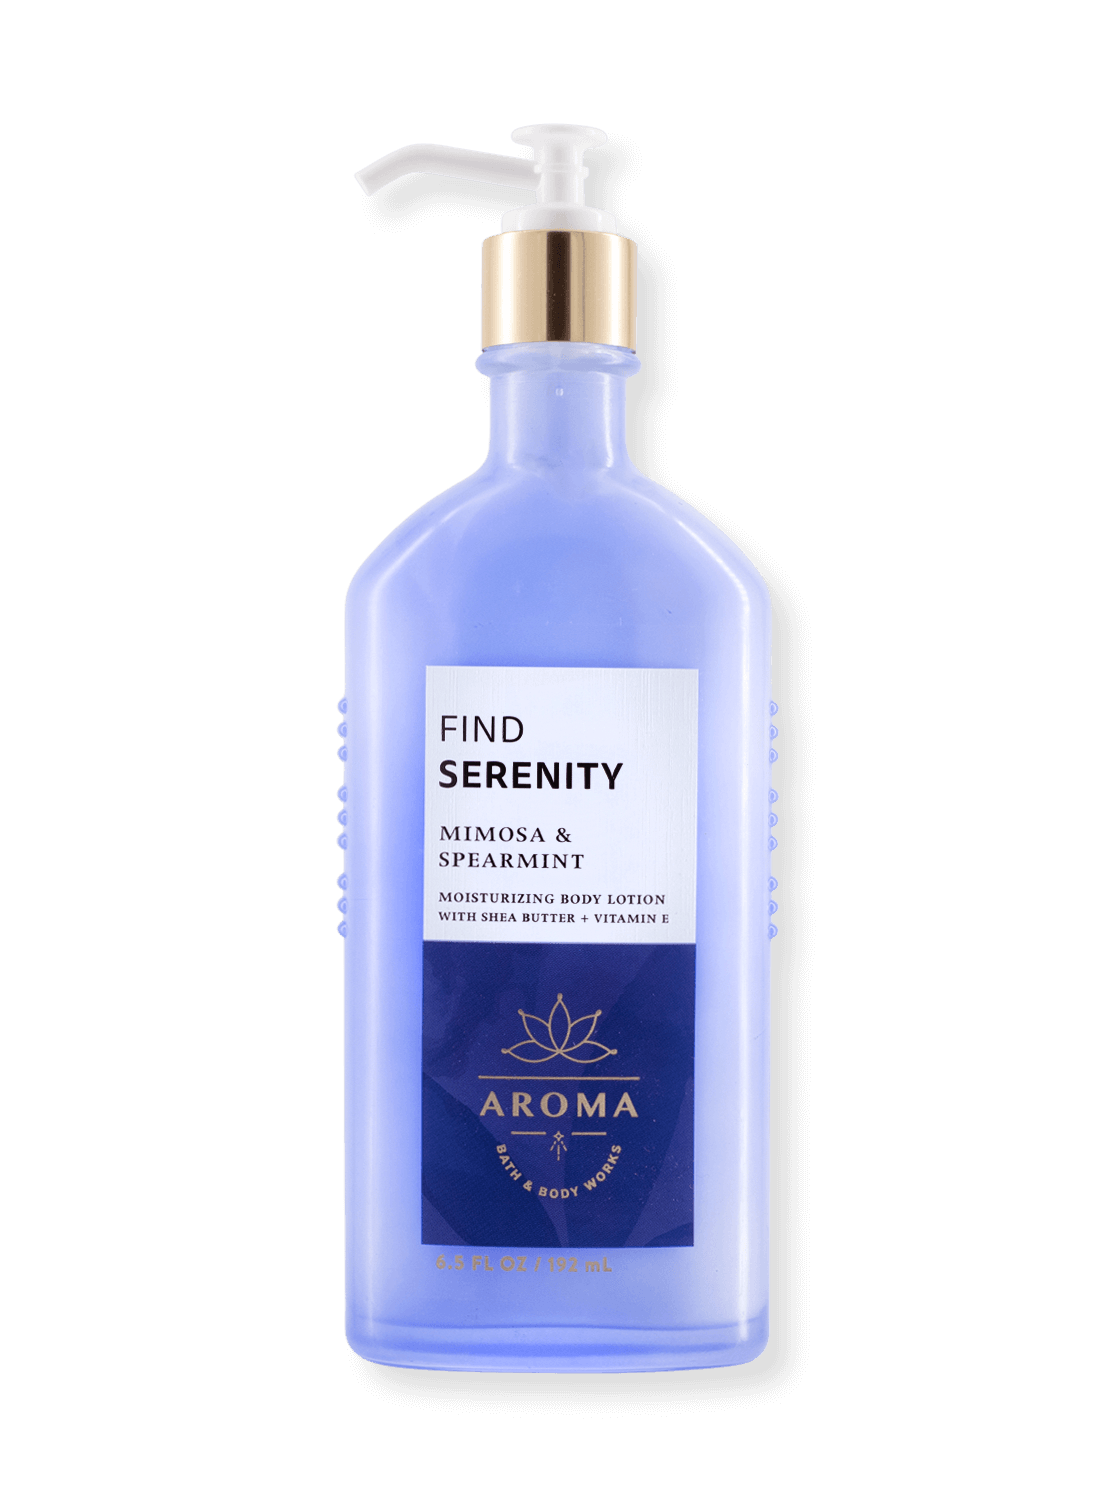 Lotion pour le corps - AROMA - Find Serentity - Mimosa &amp; Menthe verte - 192ml